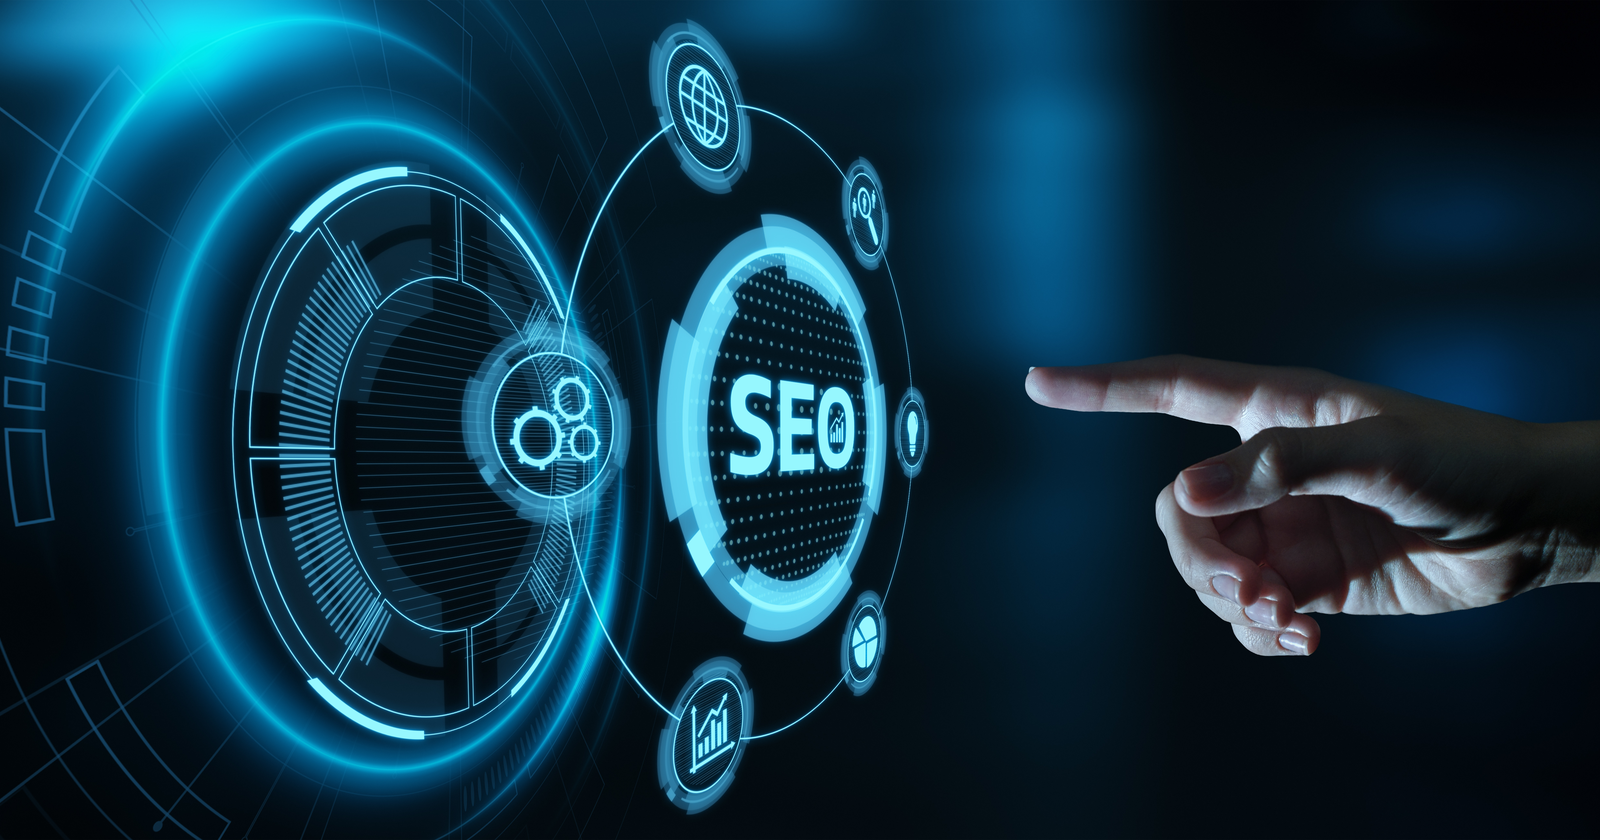 What Type of SEO Is Best?